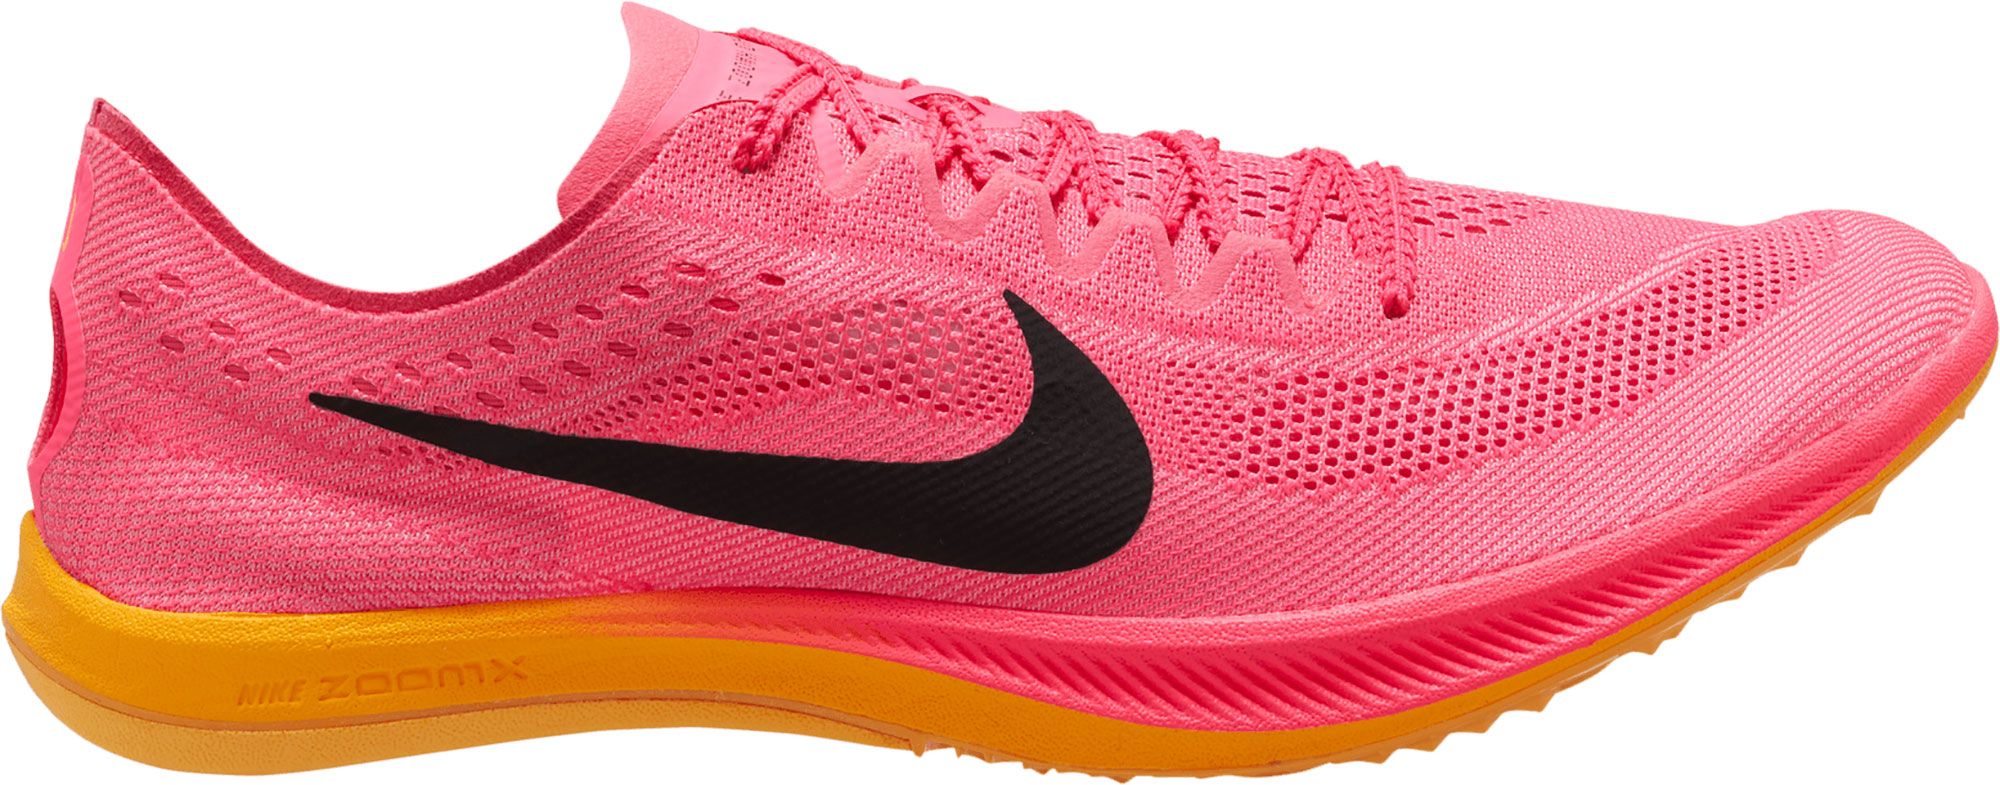 Nike Zoom X Dragonfly Track and Field Shoes | Best Price at DICK'S